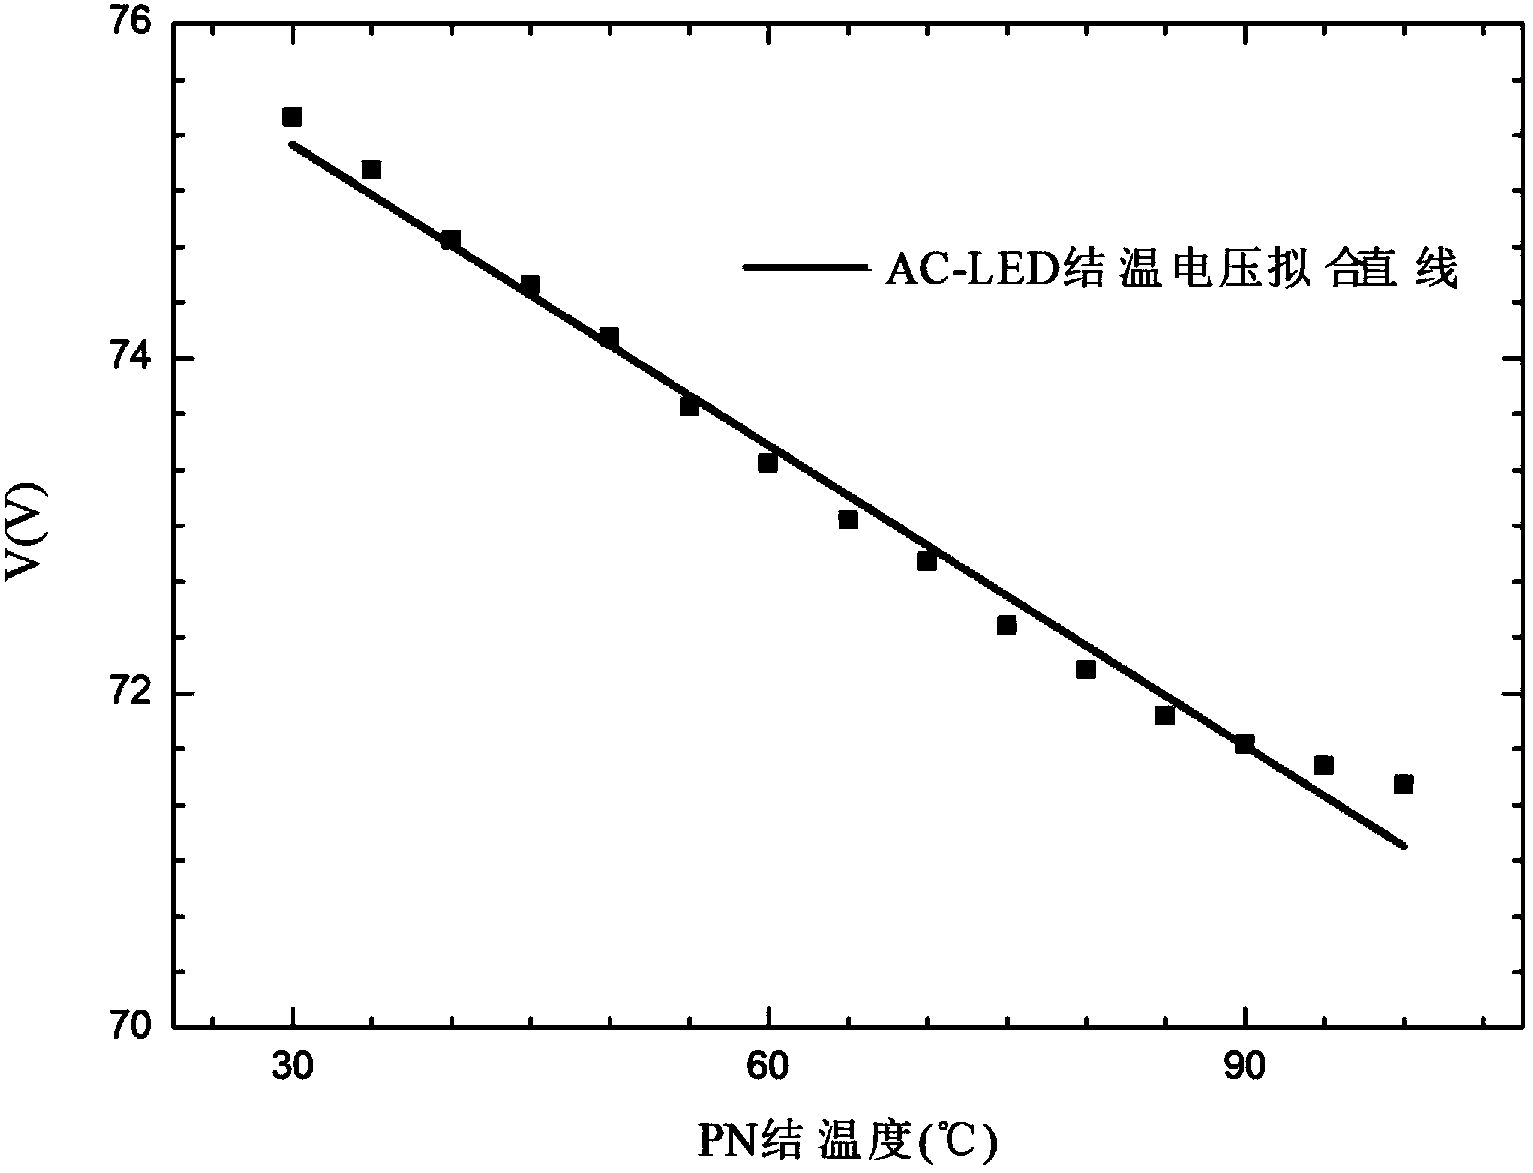 Test system and test method for measuring AC-LED junction temperature